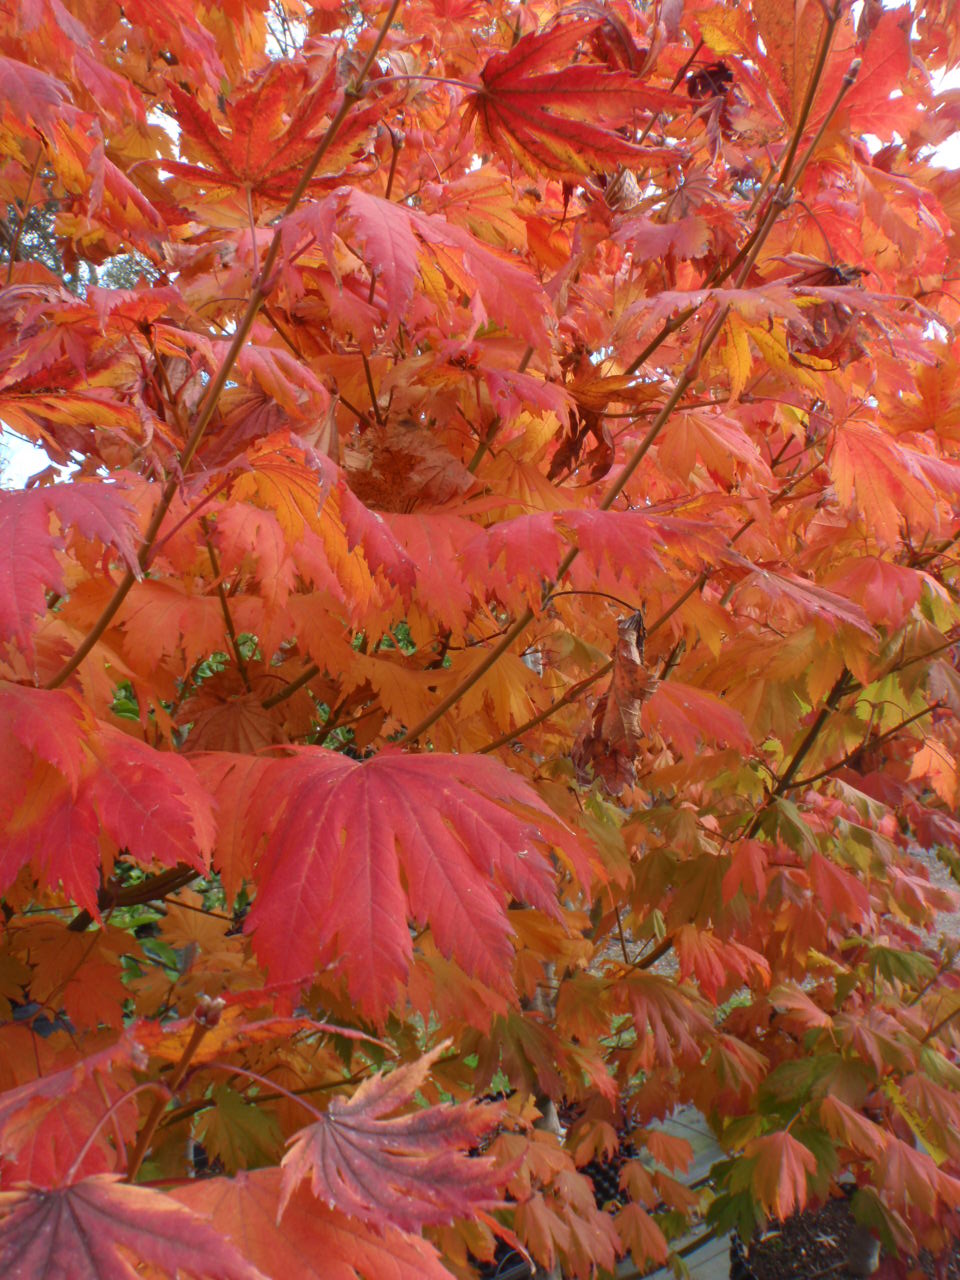 fiery foliage shows the beauty of autumn